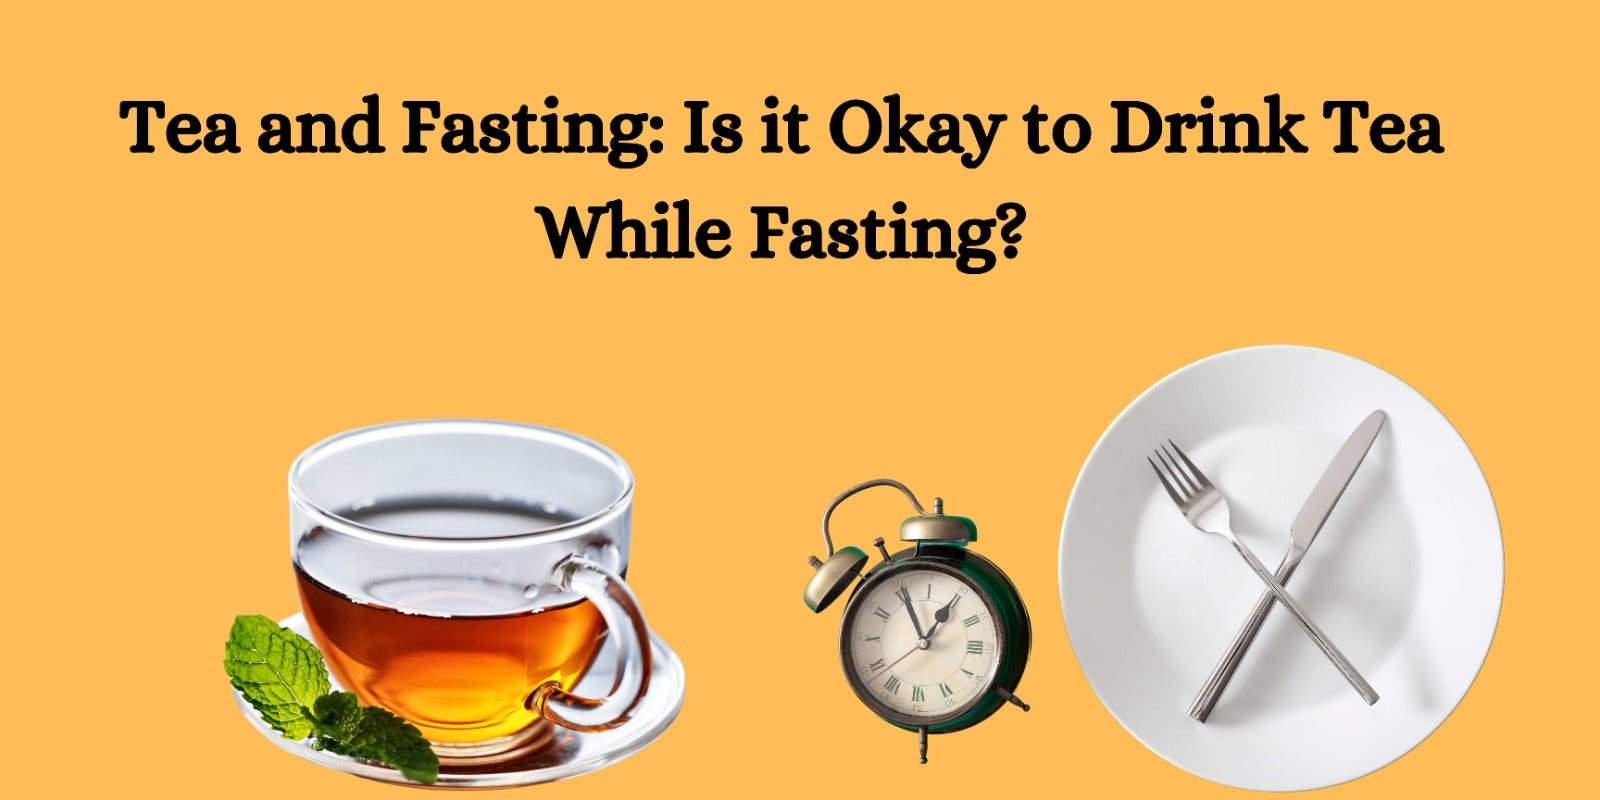 Tea and Fasting: Is it Okay to Drink Tea While Fasting?